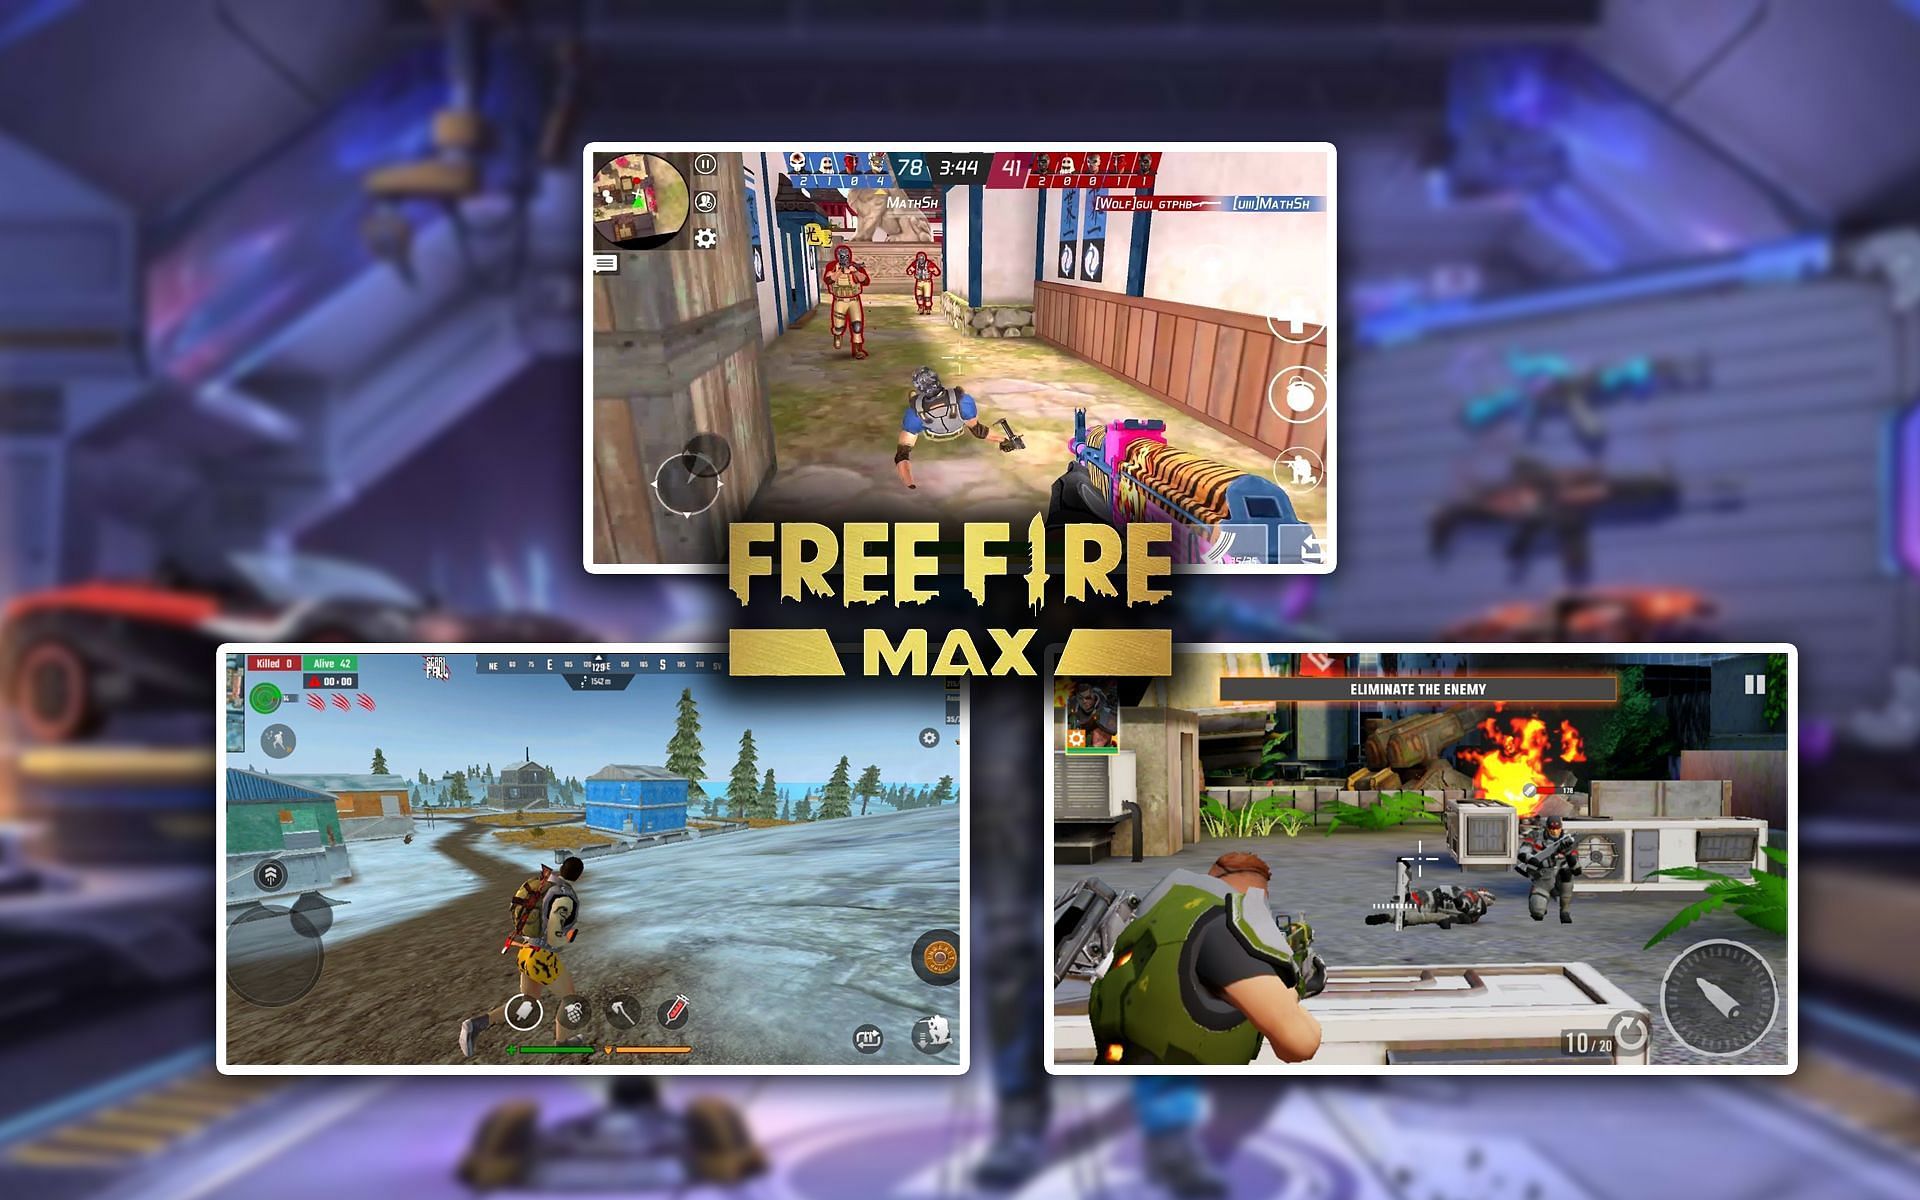 Top five games like Free Fire MAX for 2 GB RAM Android devices (Image via Sportskeeda)